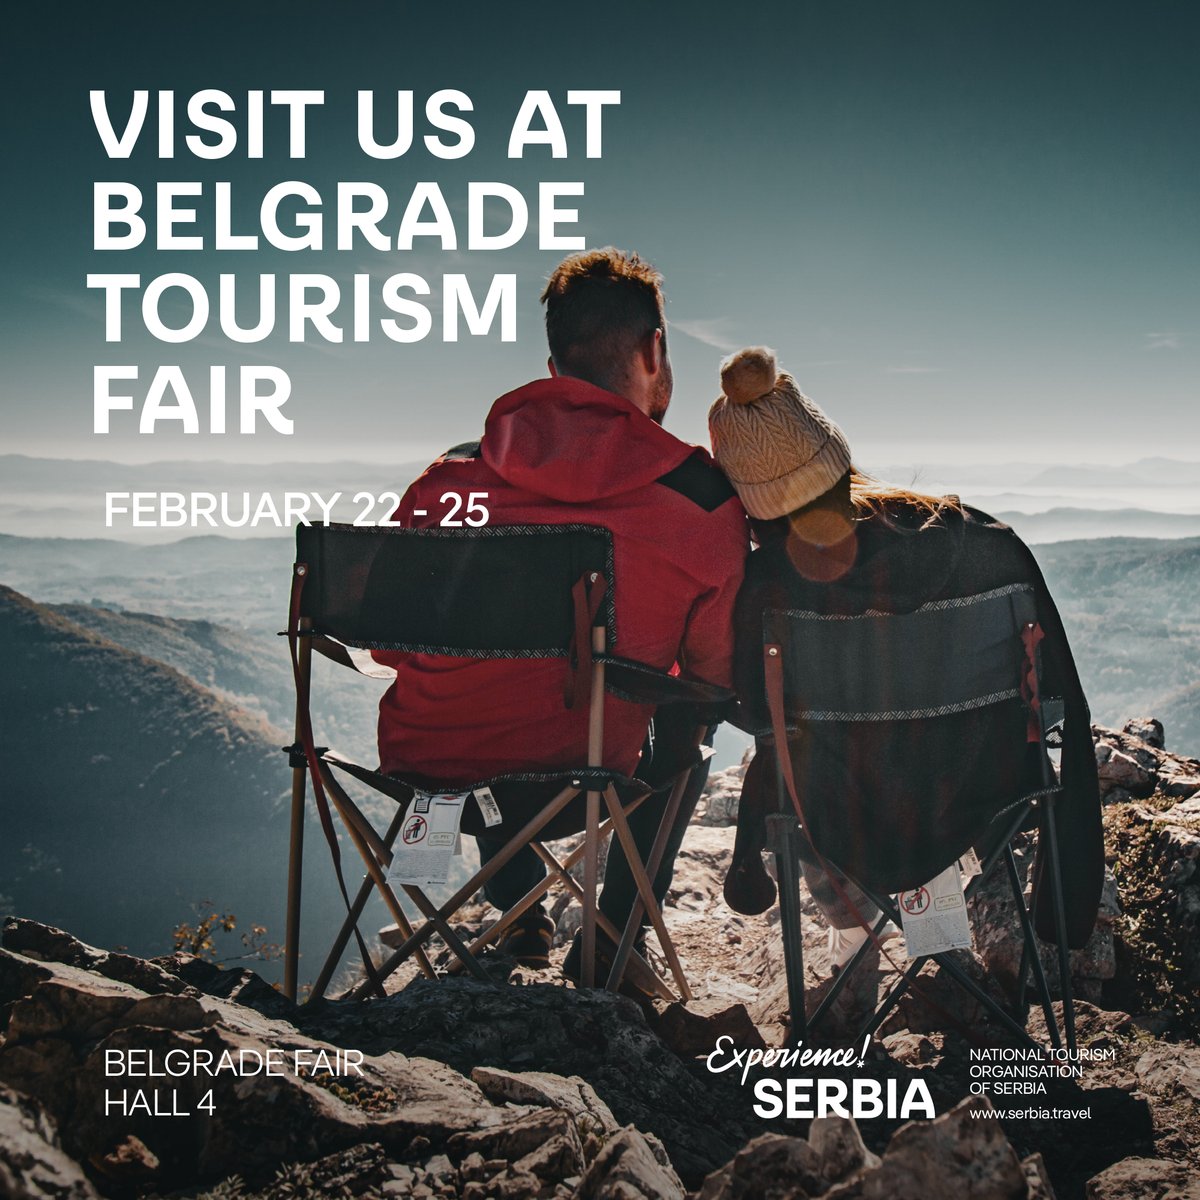 February is the month of fresh energy, and exactly it fuels the 45th International Tourism Fair! Discover the entire spectrum of Serbia's tourism offer from February 22 to 25 at the halls of the Belgrade Fair.
Experience Serbia at your fingertips!

#experienceSerbia #visitserbia